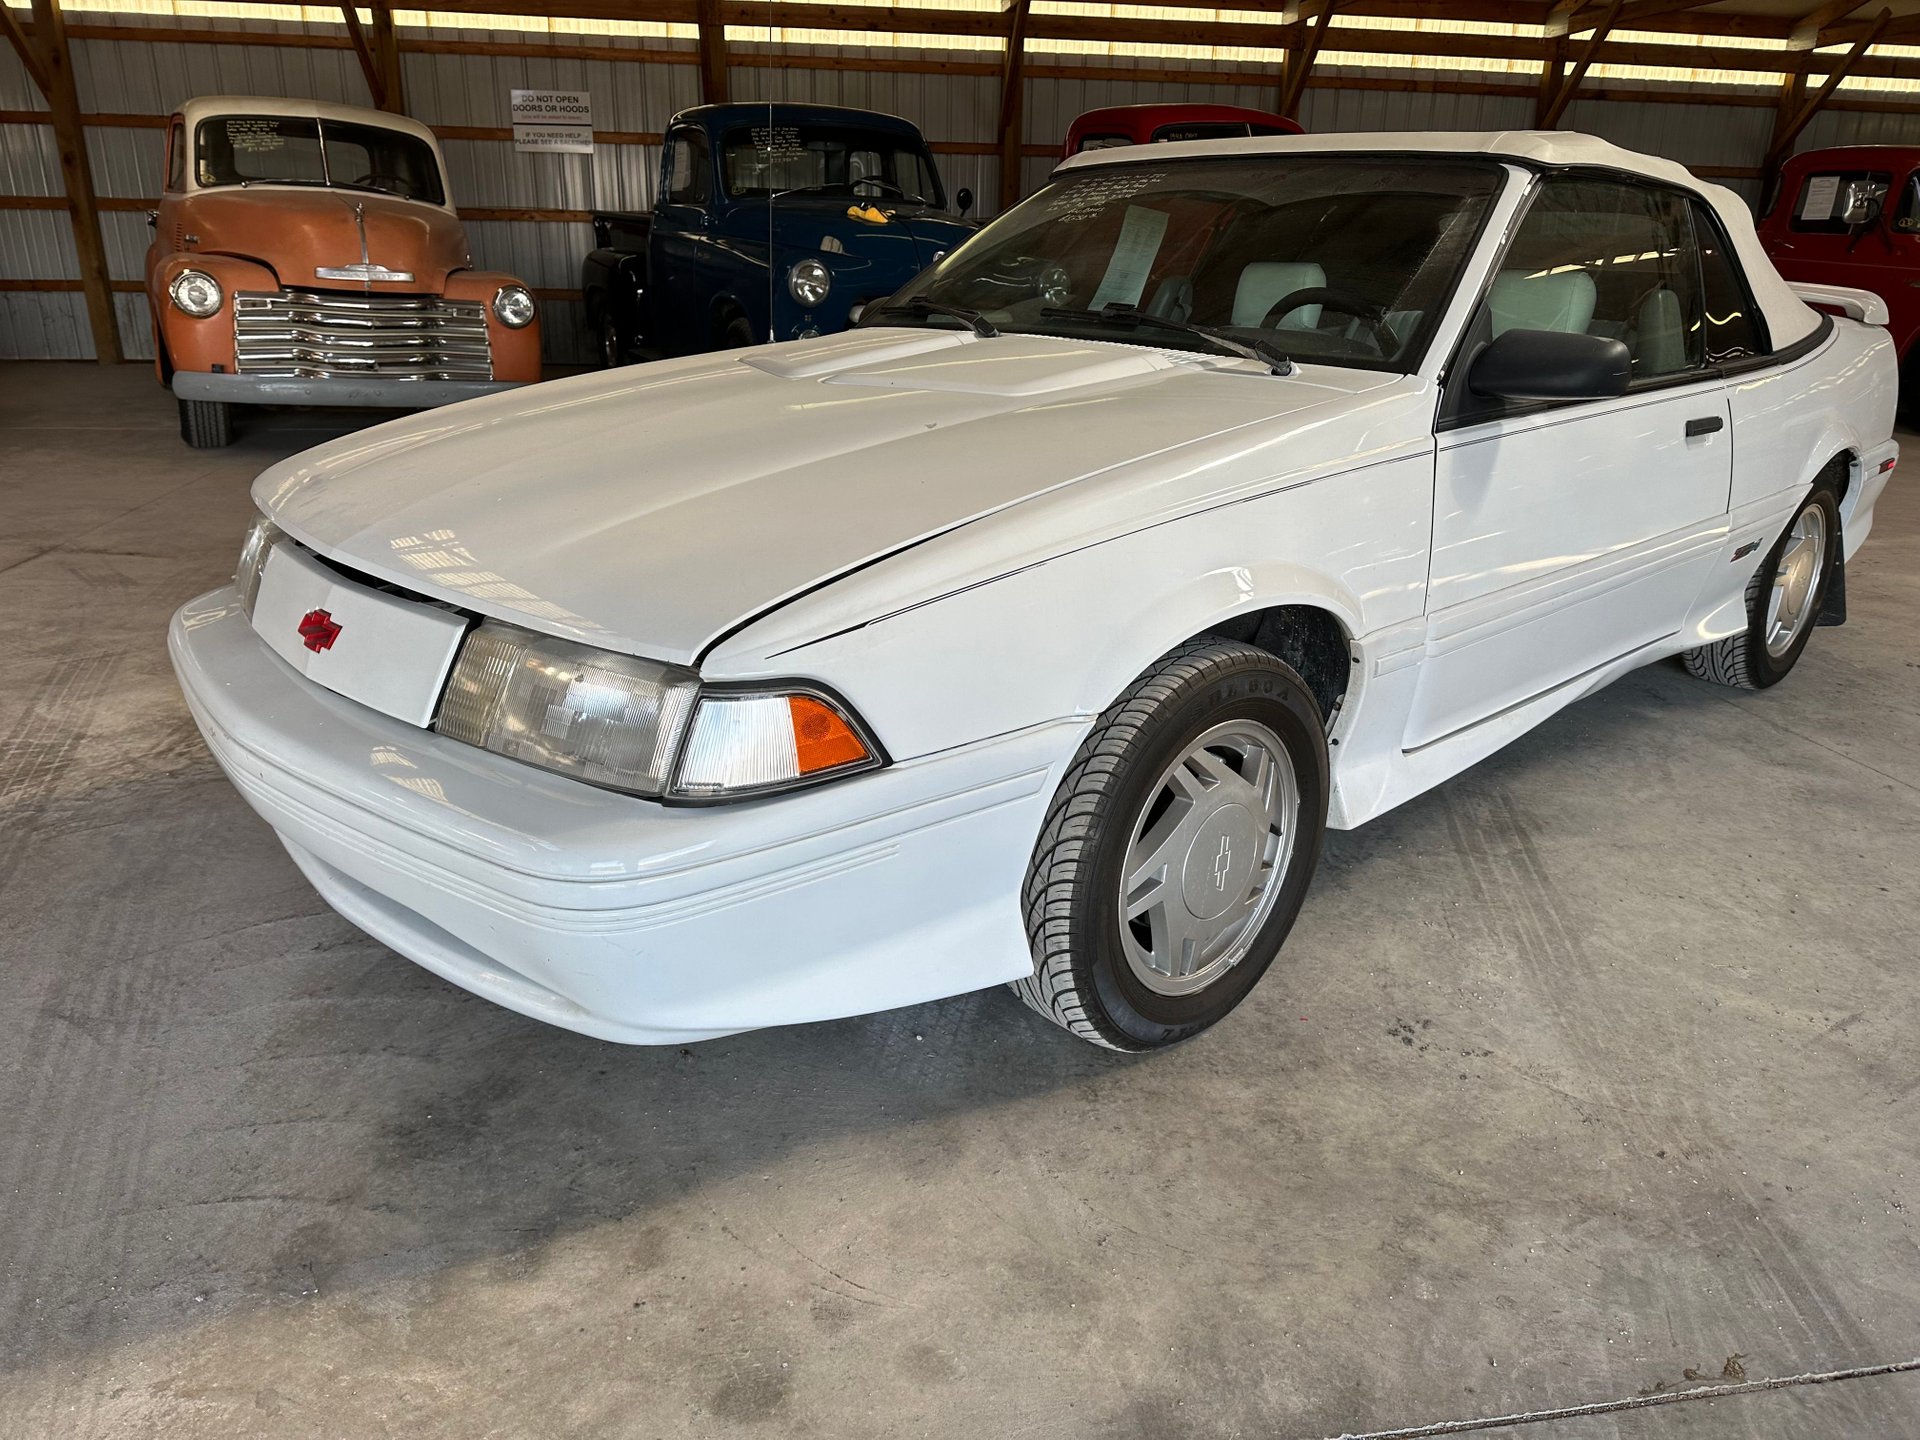 1994 Chevrolet Cavalier | Country Classic Cars